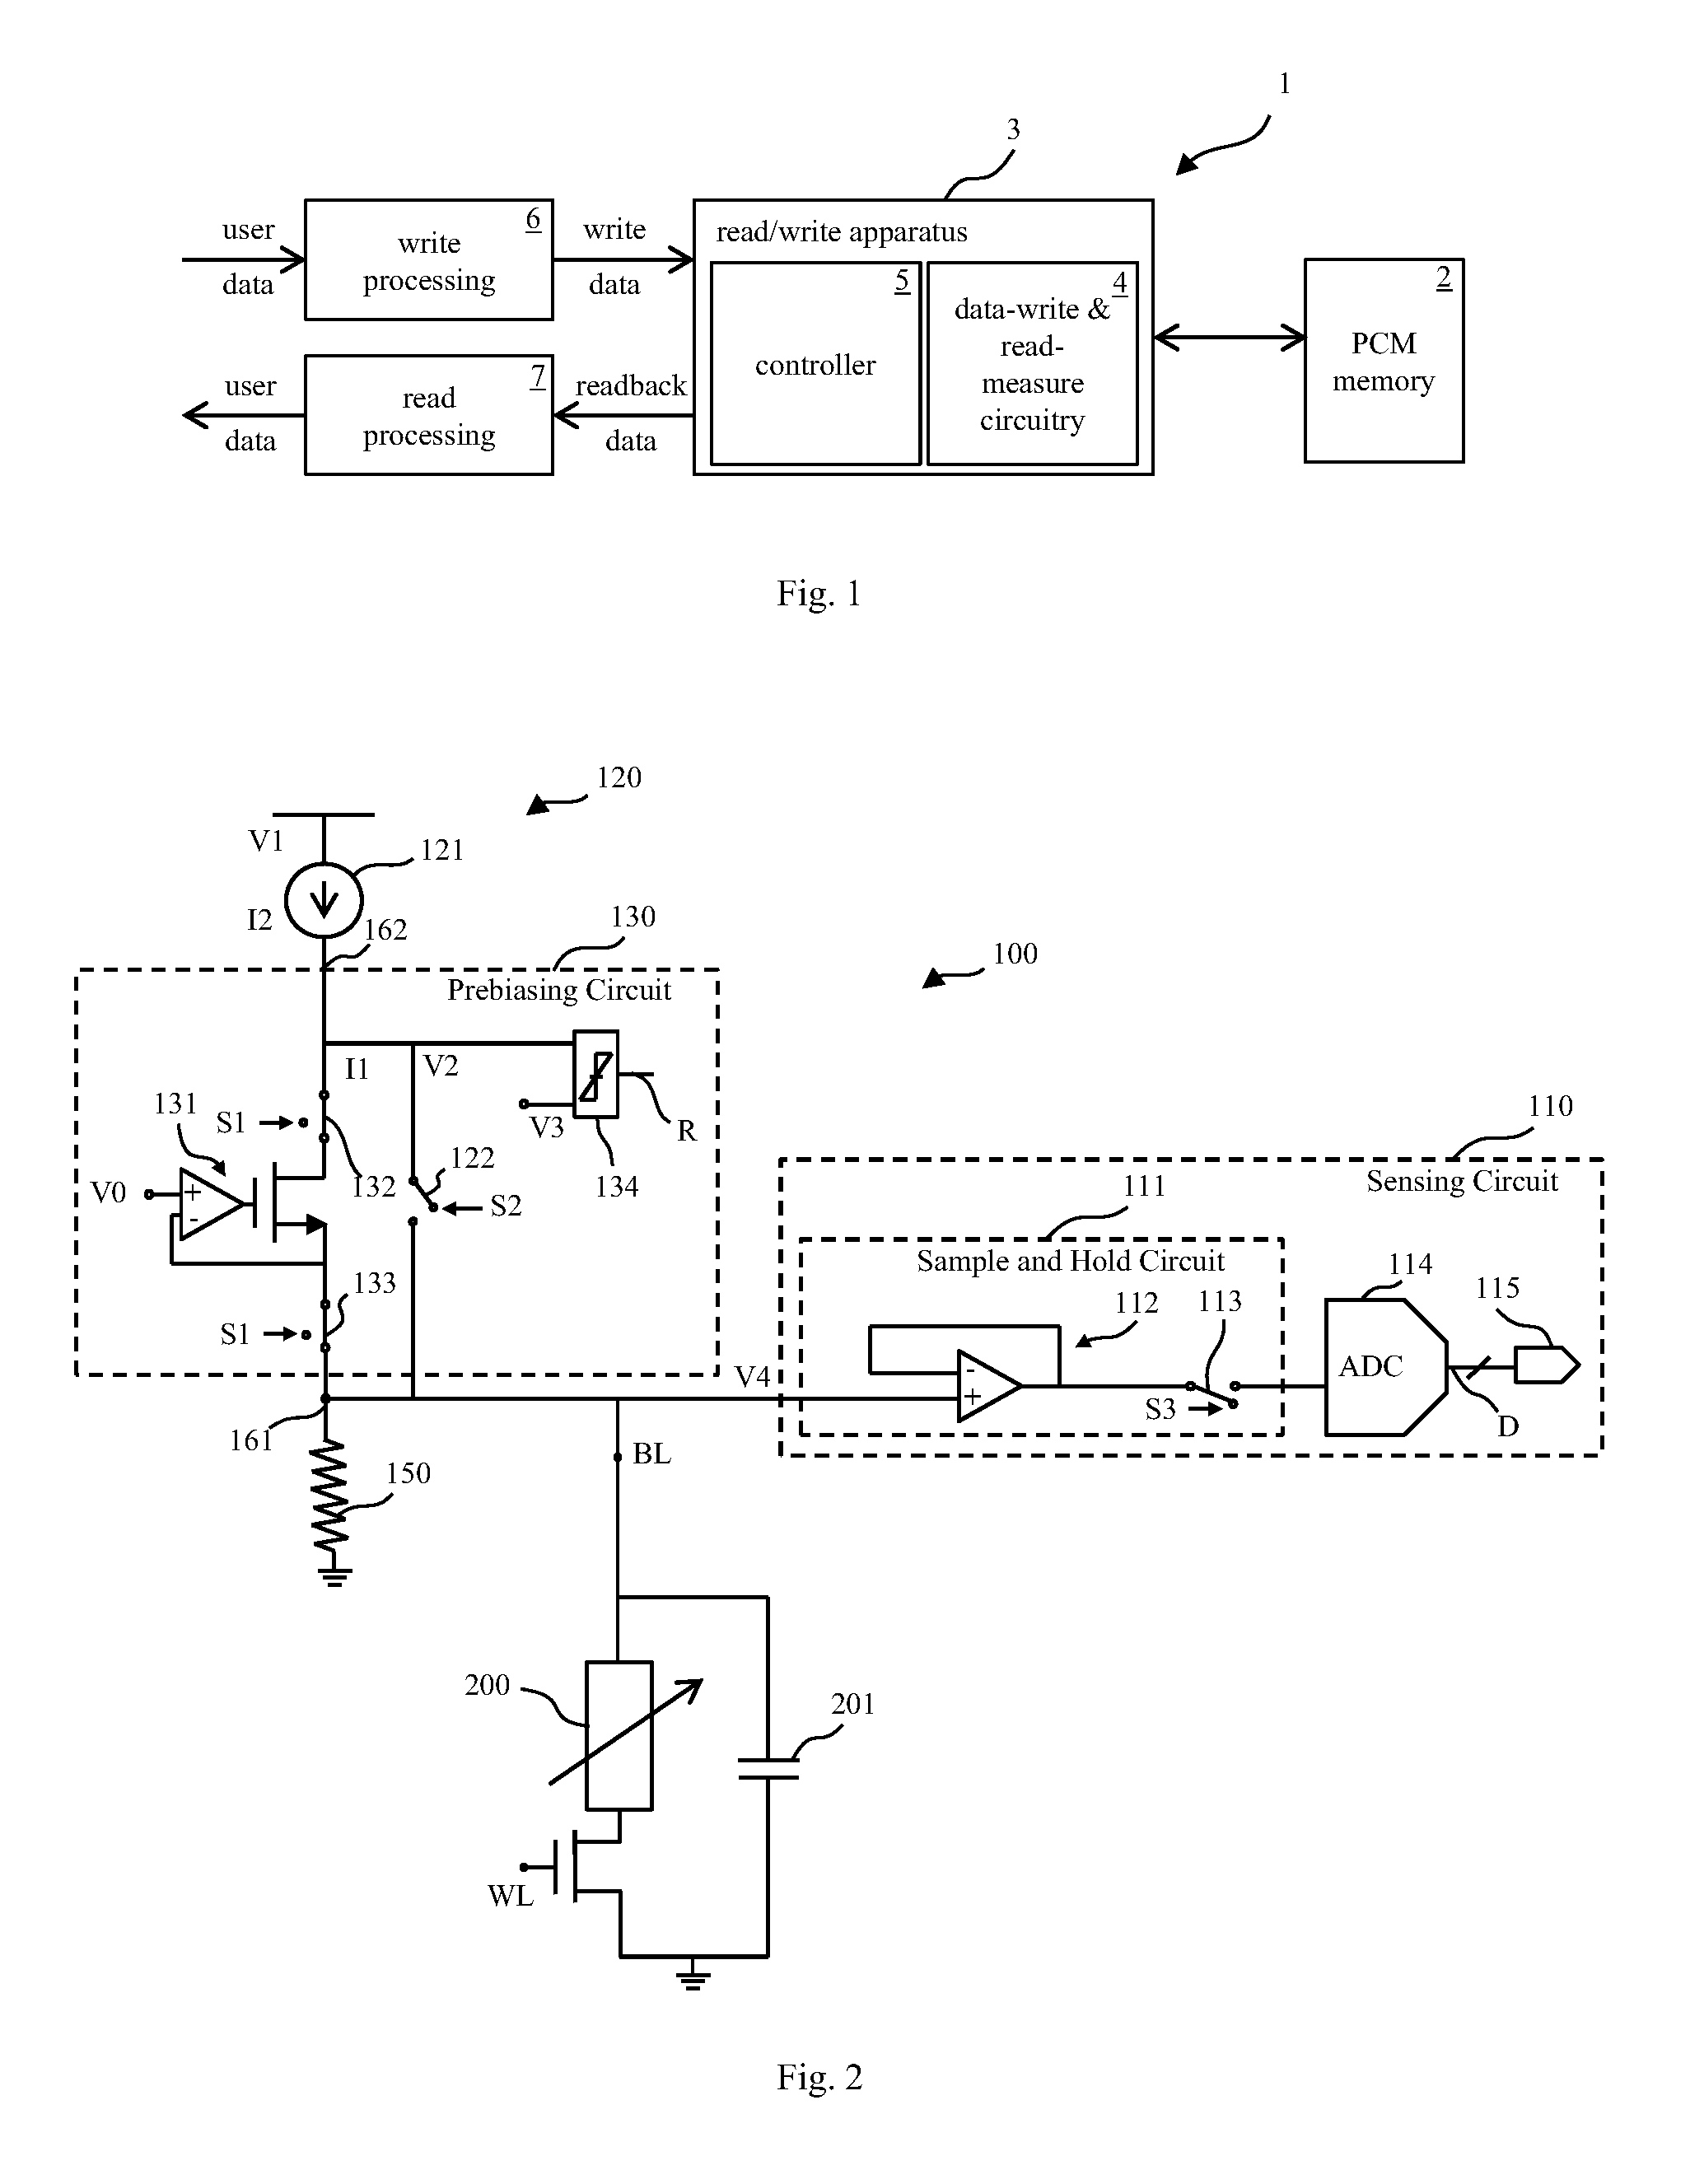 Method and apparatus for faster determination of a cell state of a resistive memory cell using a parallel resistor